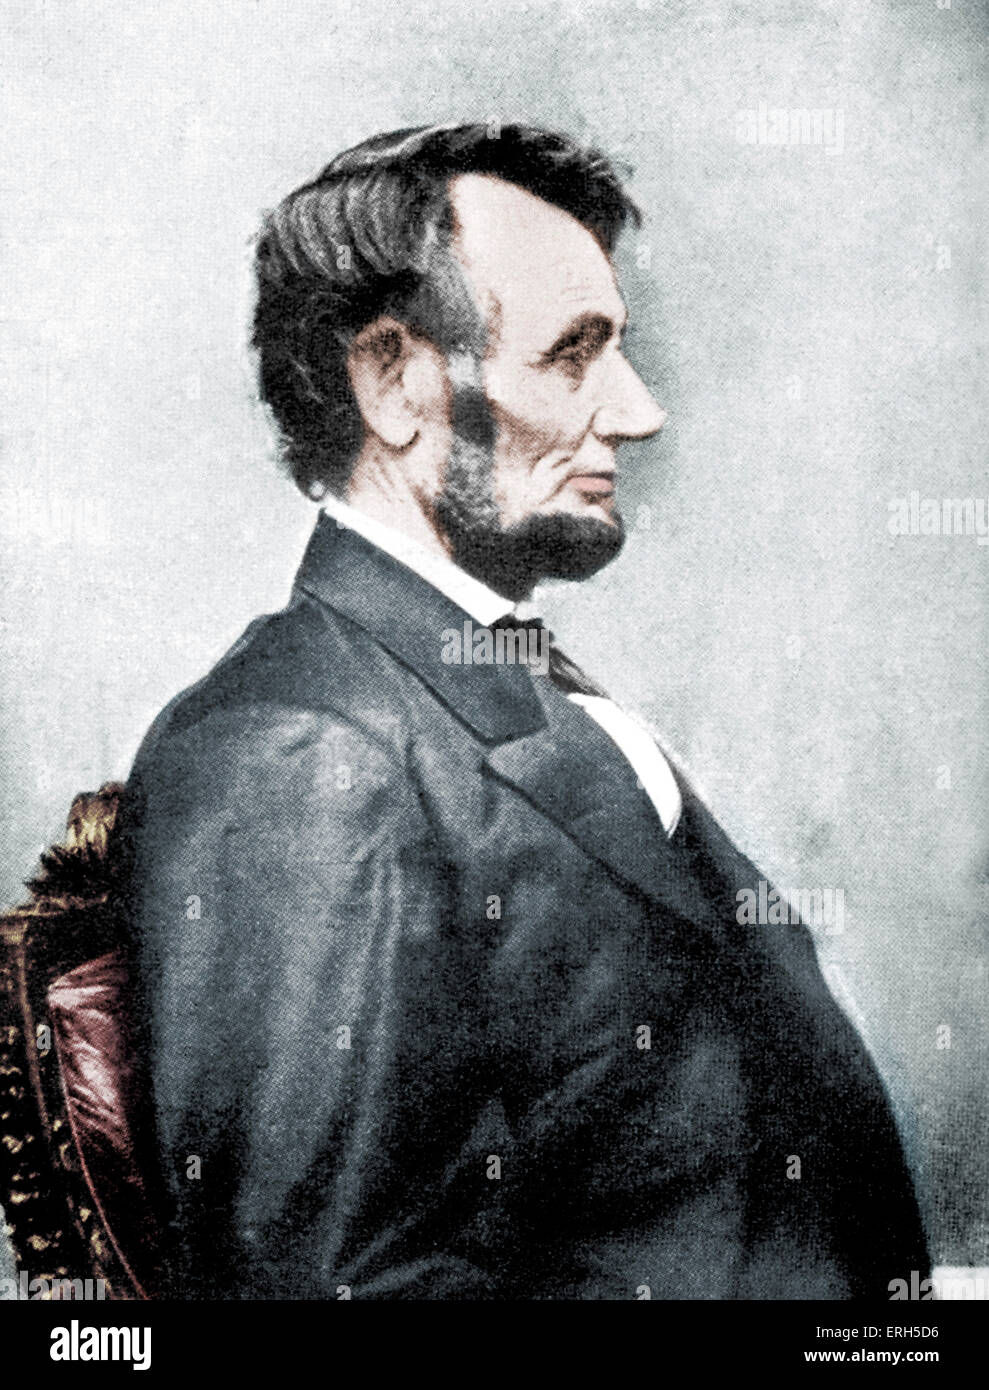 Abraham Lincoln - portrait in profile. Photograph of the 16th President of the United States taken in 1864, a year before he was assassinated. 12 February 1809 – 15 April 1865. Colourised version. Stock Photo